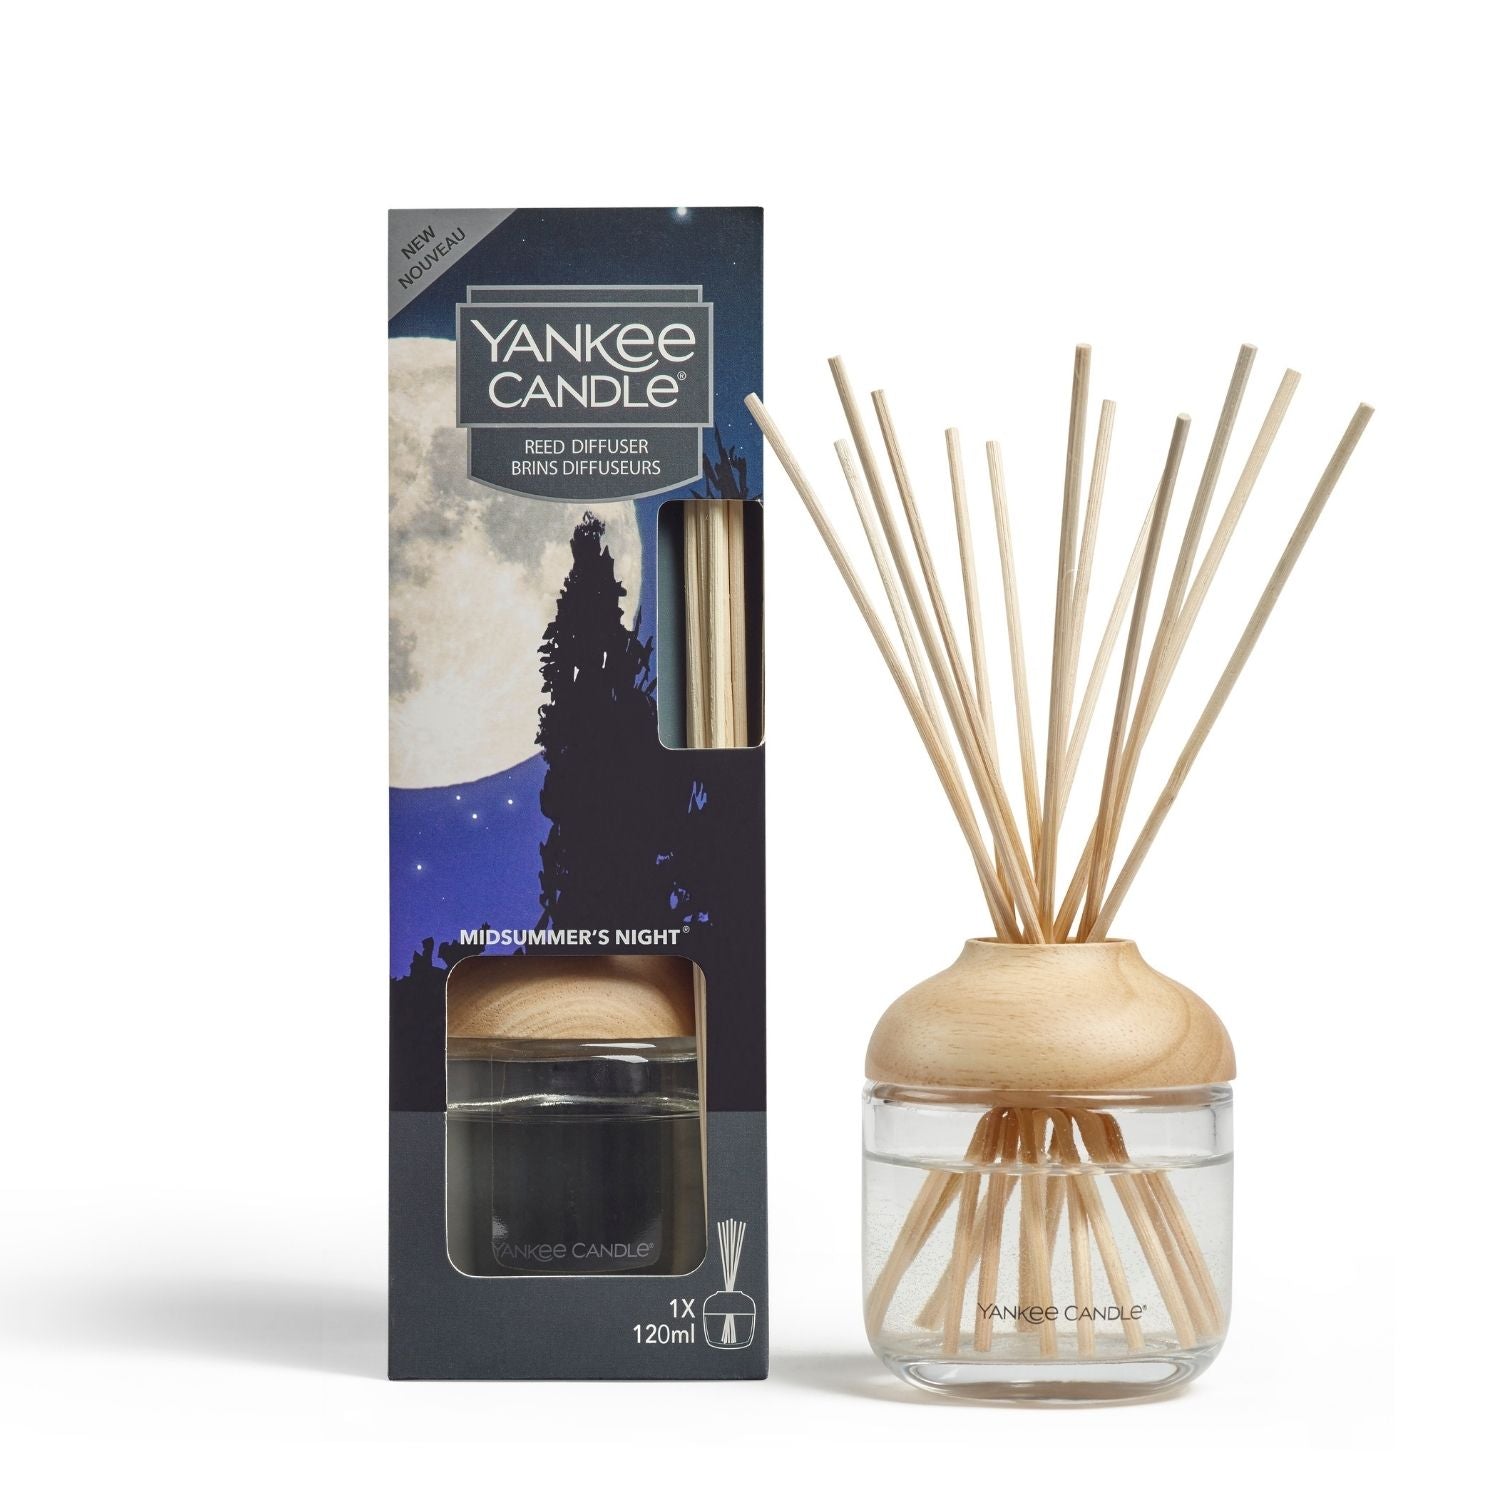 Yankee Candle Reed Diffuser - Midsummers Night 1 Shaws Department Stores